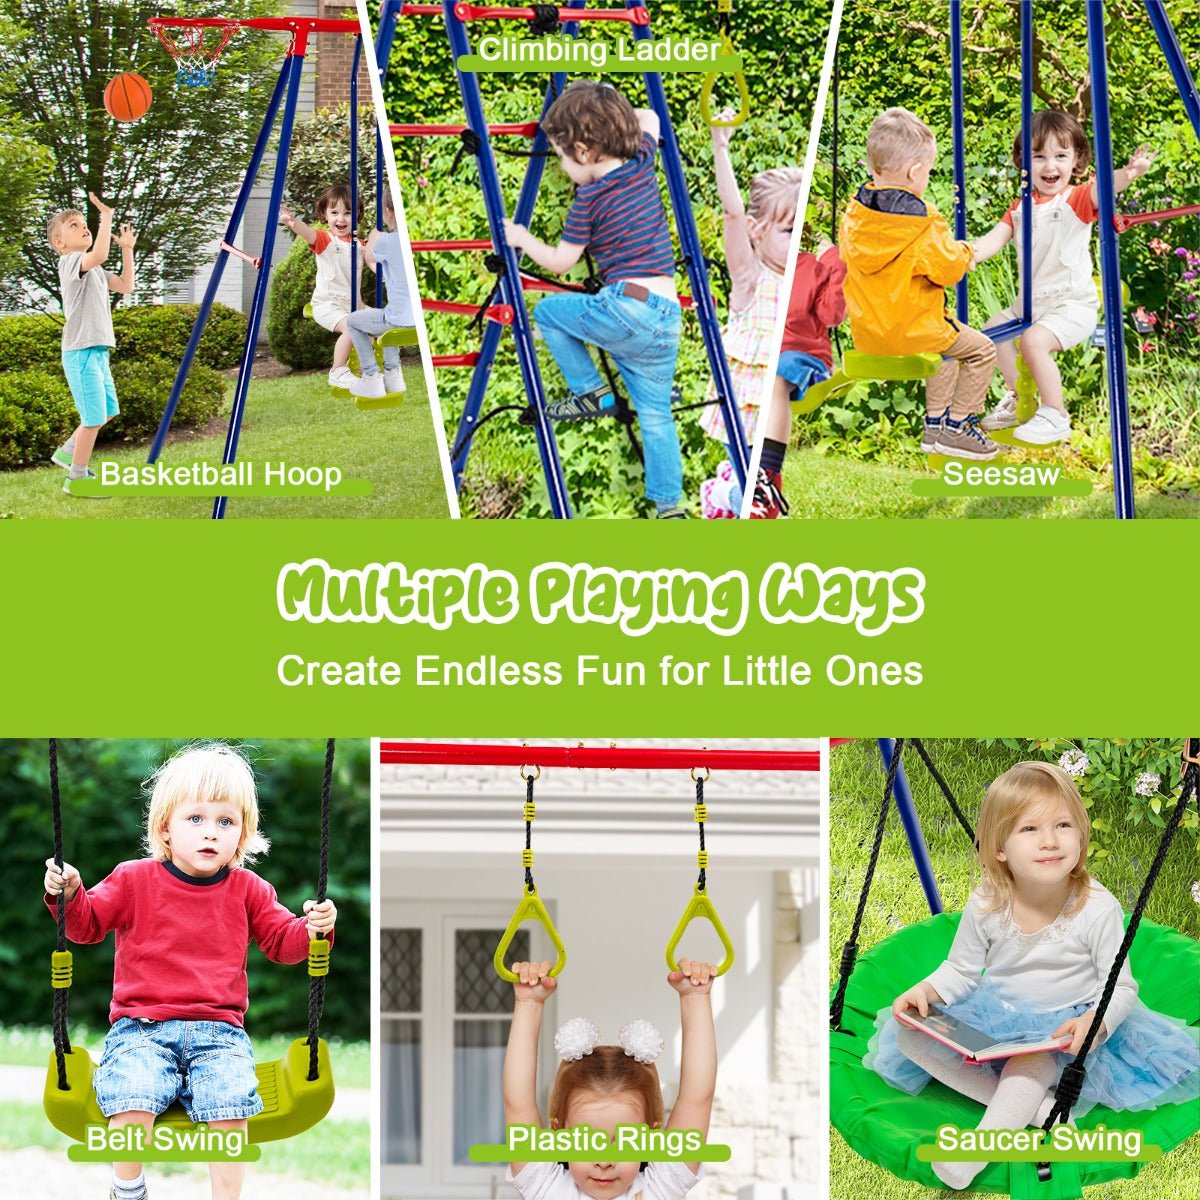 Swing Set with Climbing Ladder: Outdoor Fitness and Fun for Children